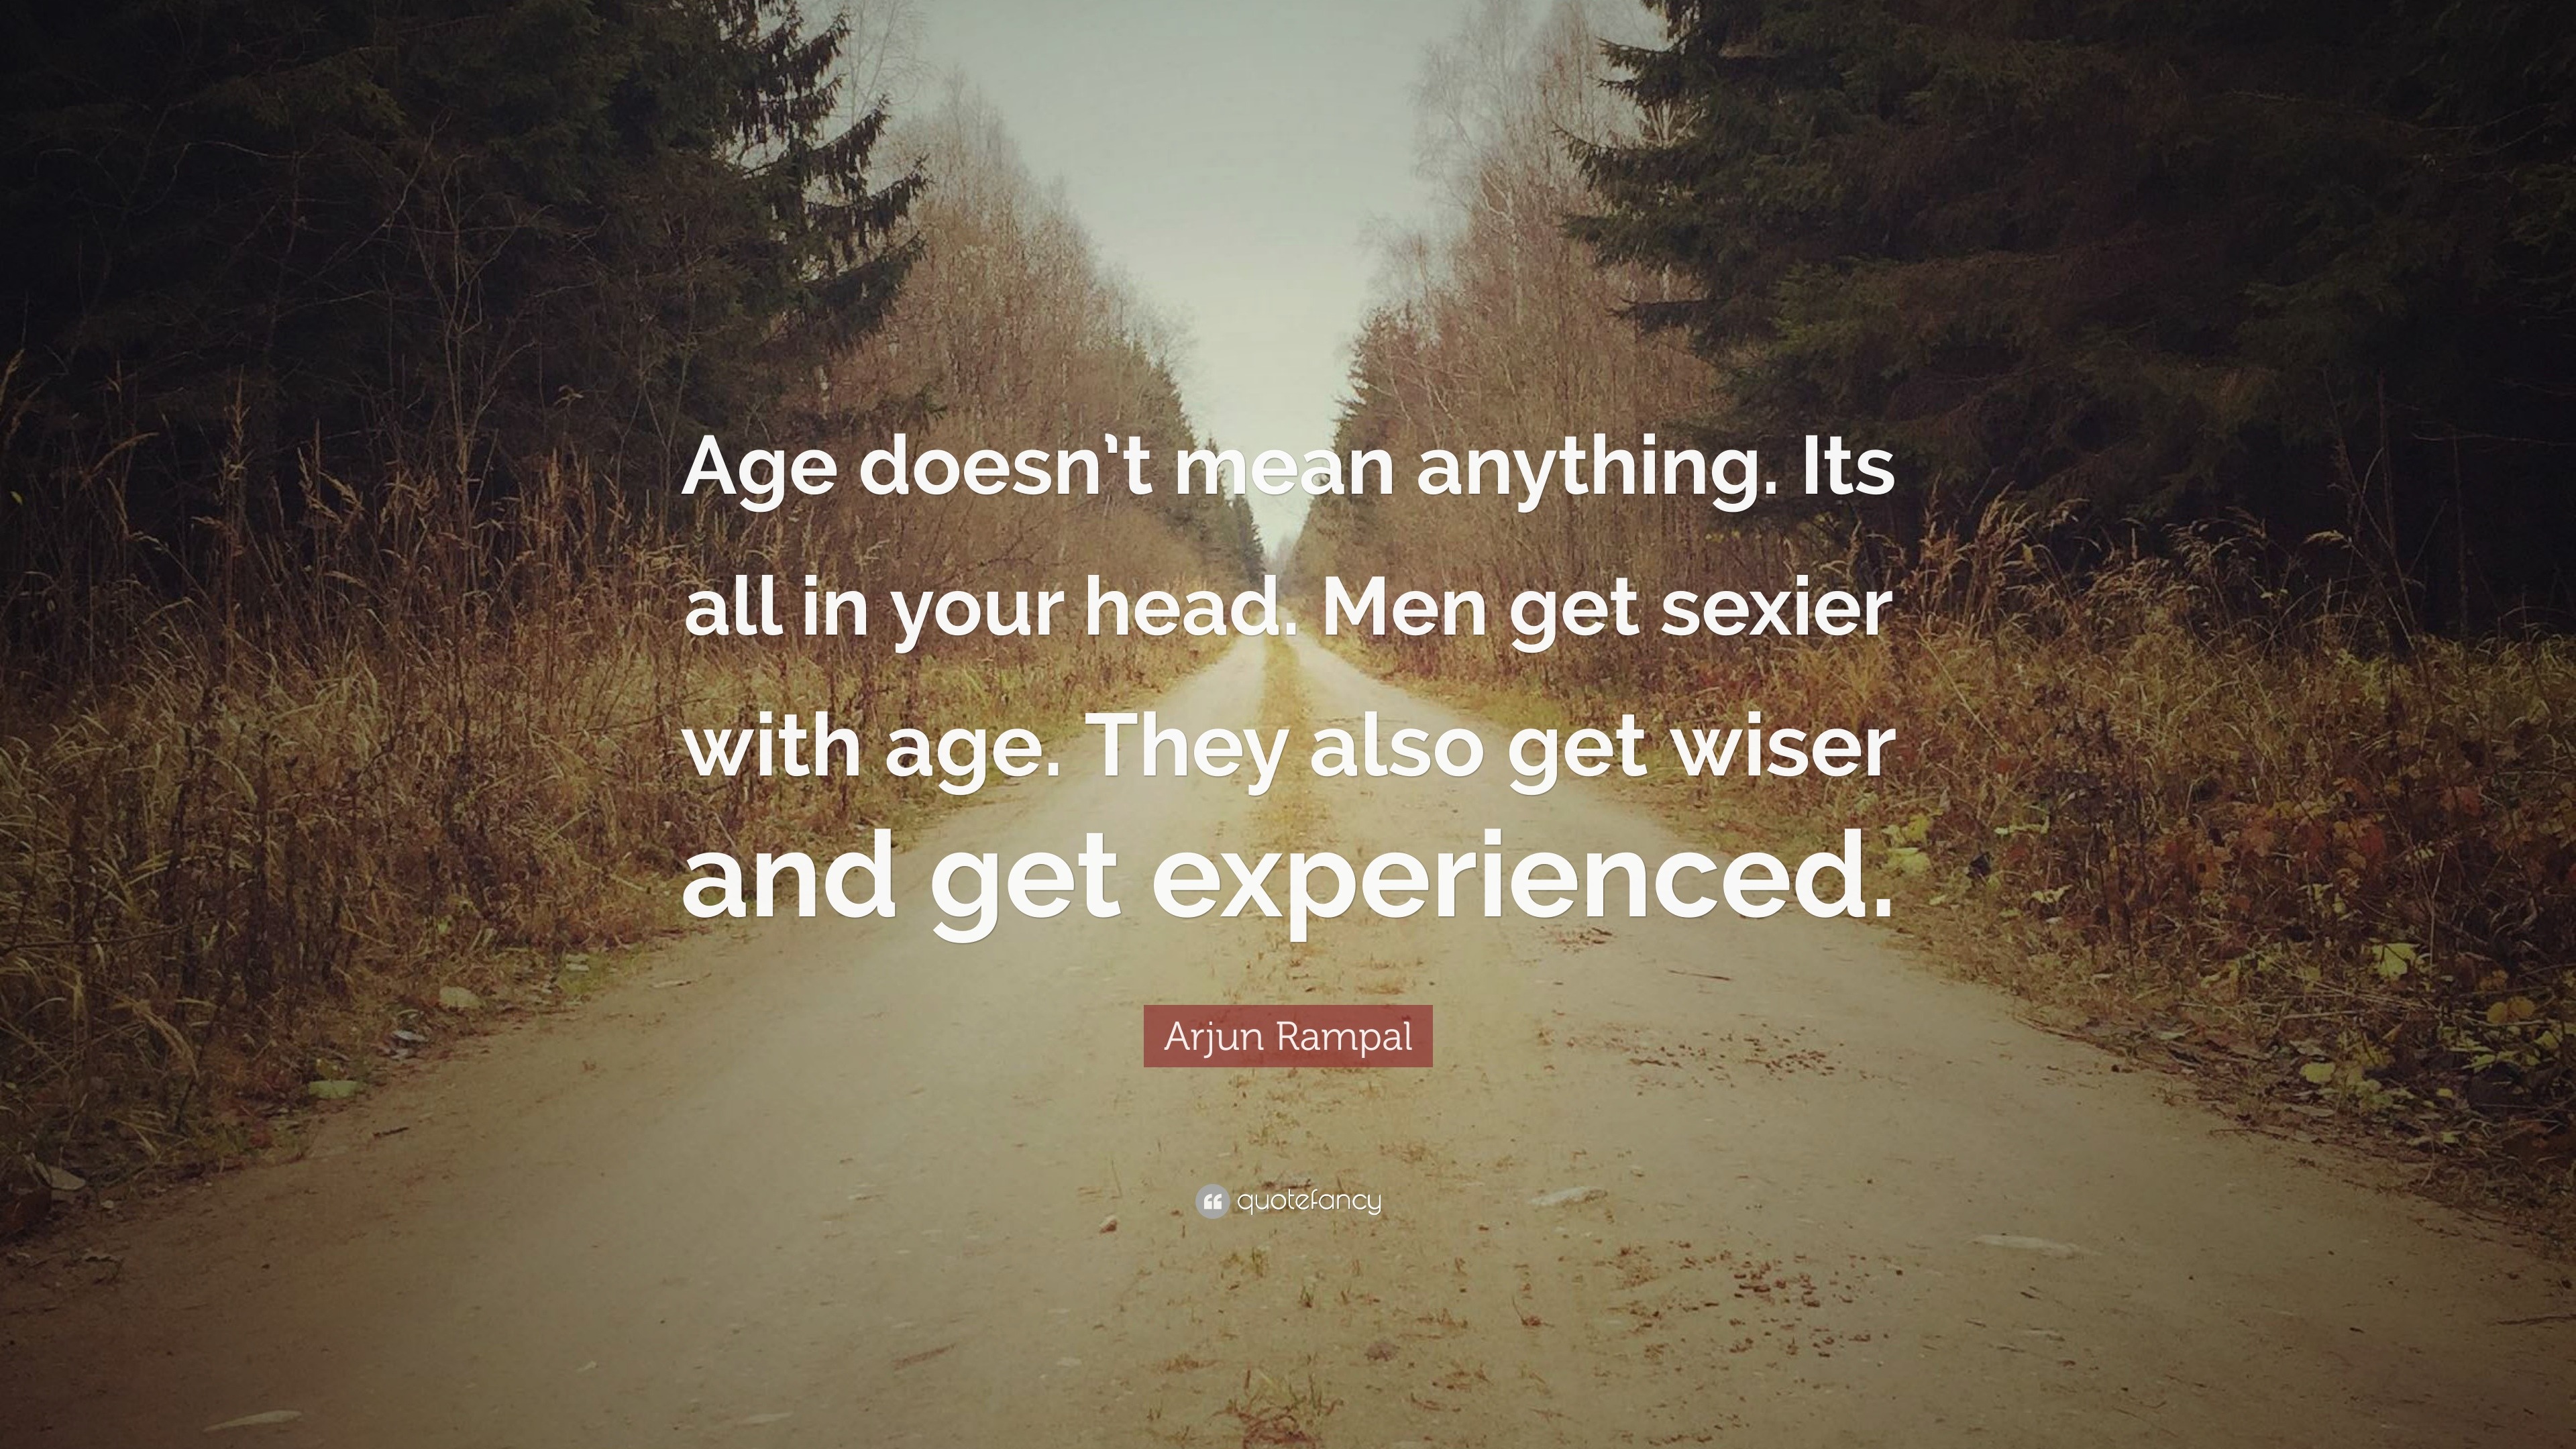 Age Doesn't Matter Your P, Quotes & Writings by Shreya Jain